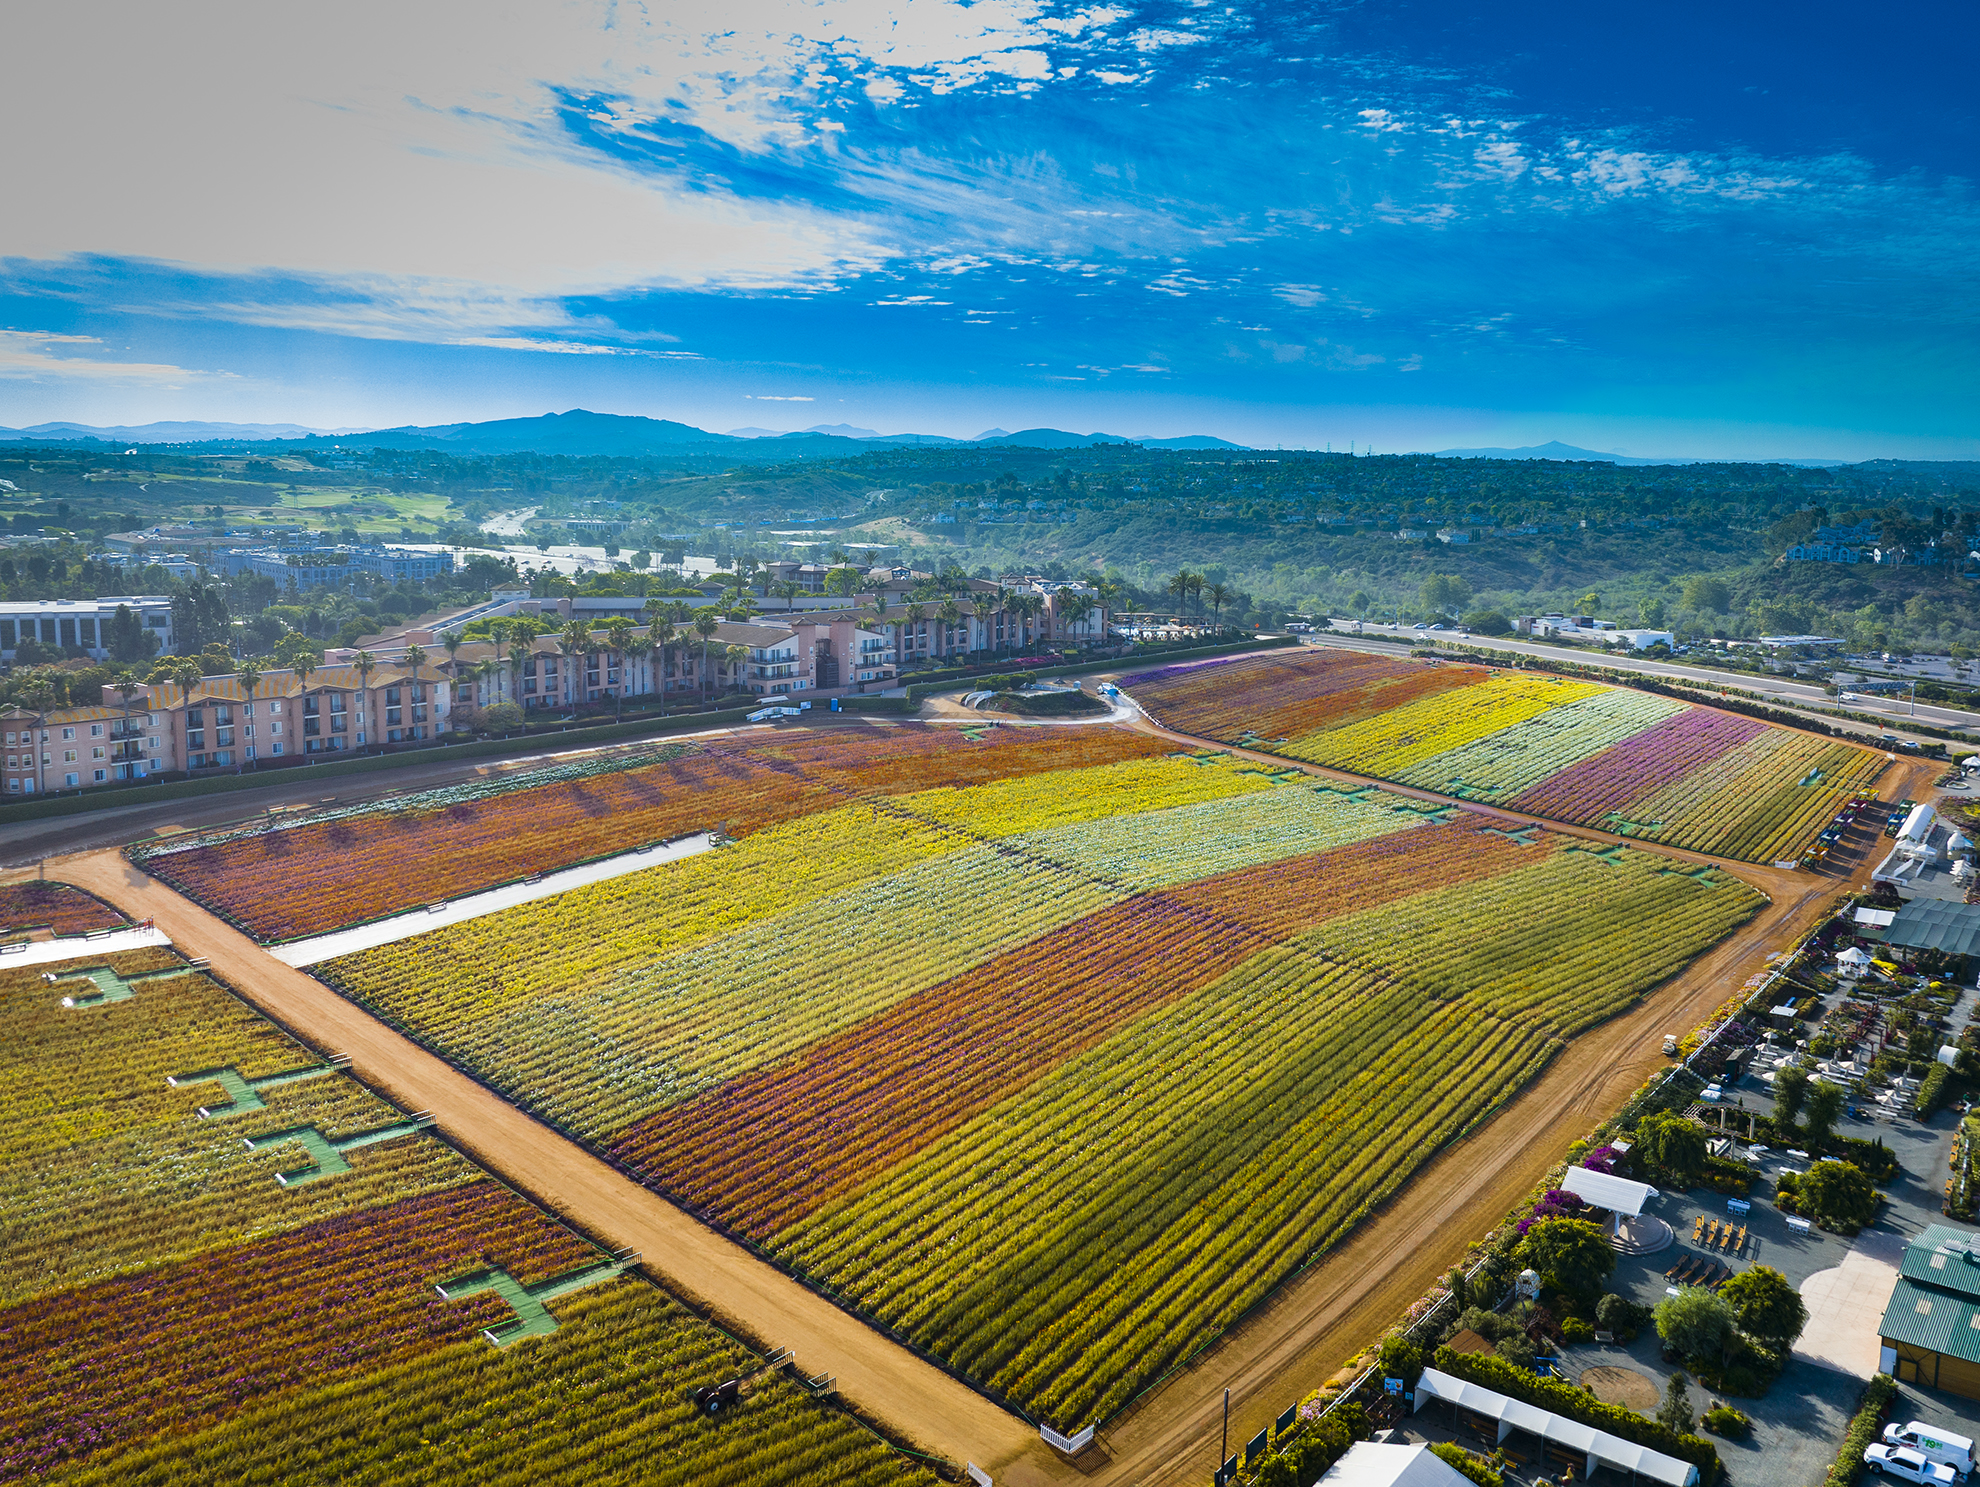 Drone photograph of Flower Fields in Carlsbad California